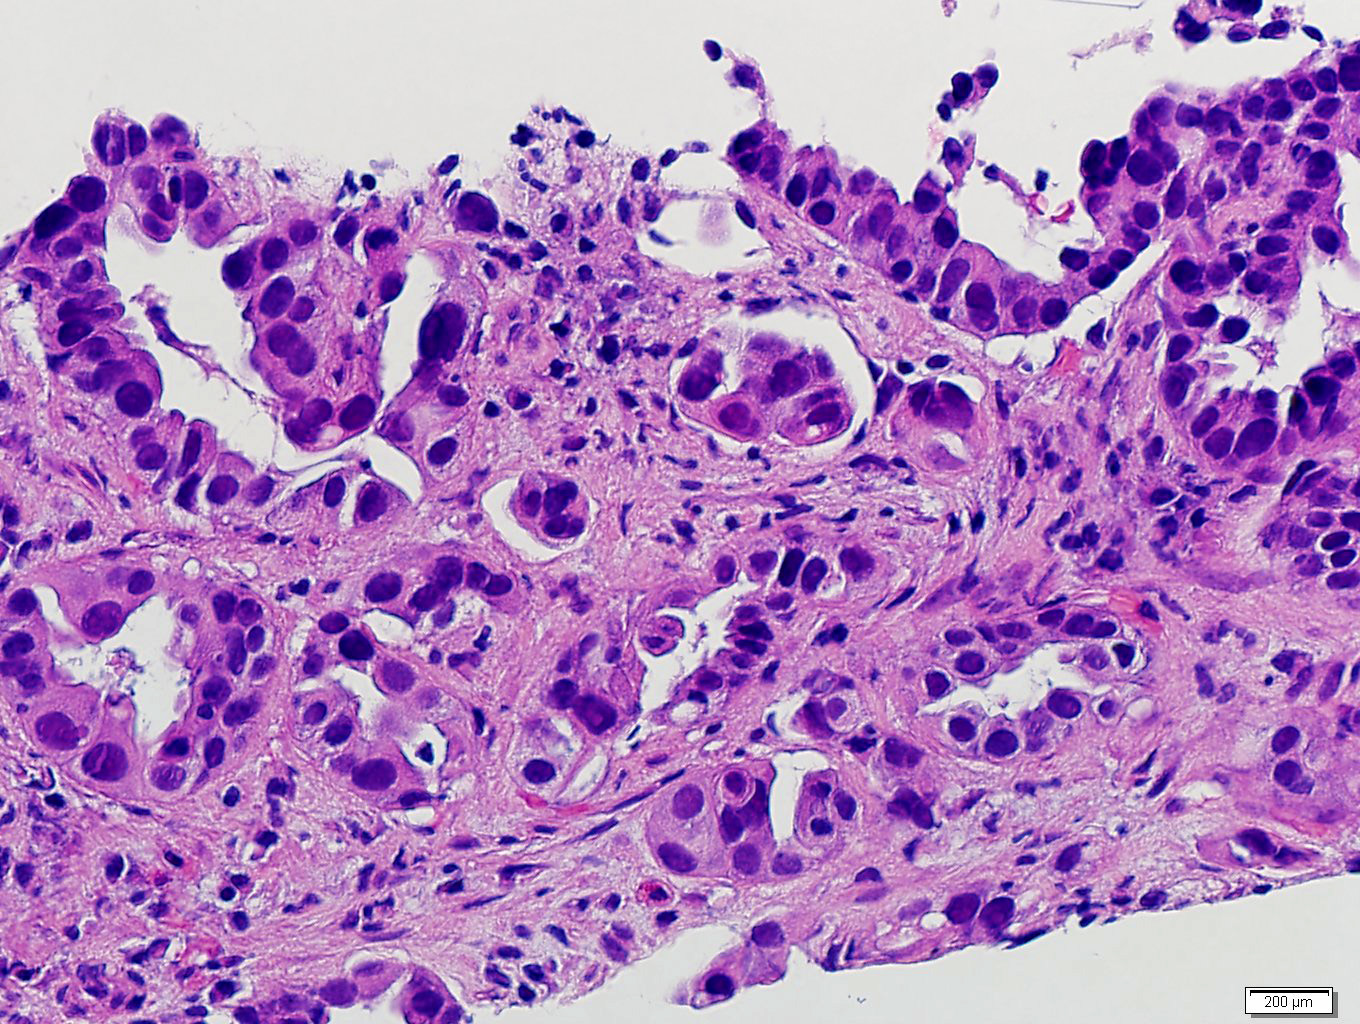 Adrenal metastasis from lung adenocarcinoma